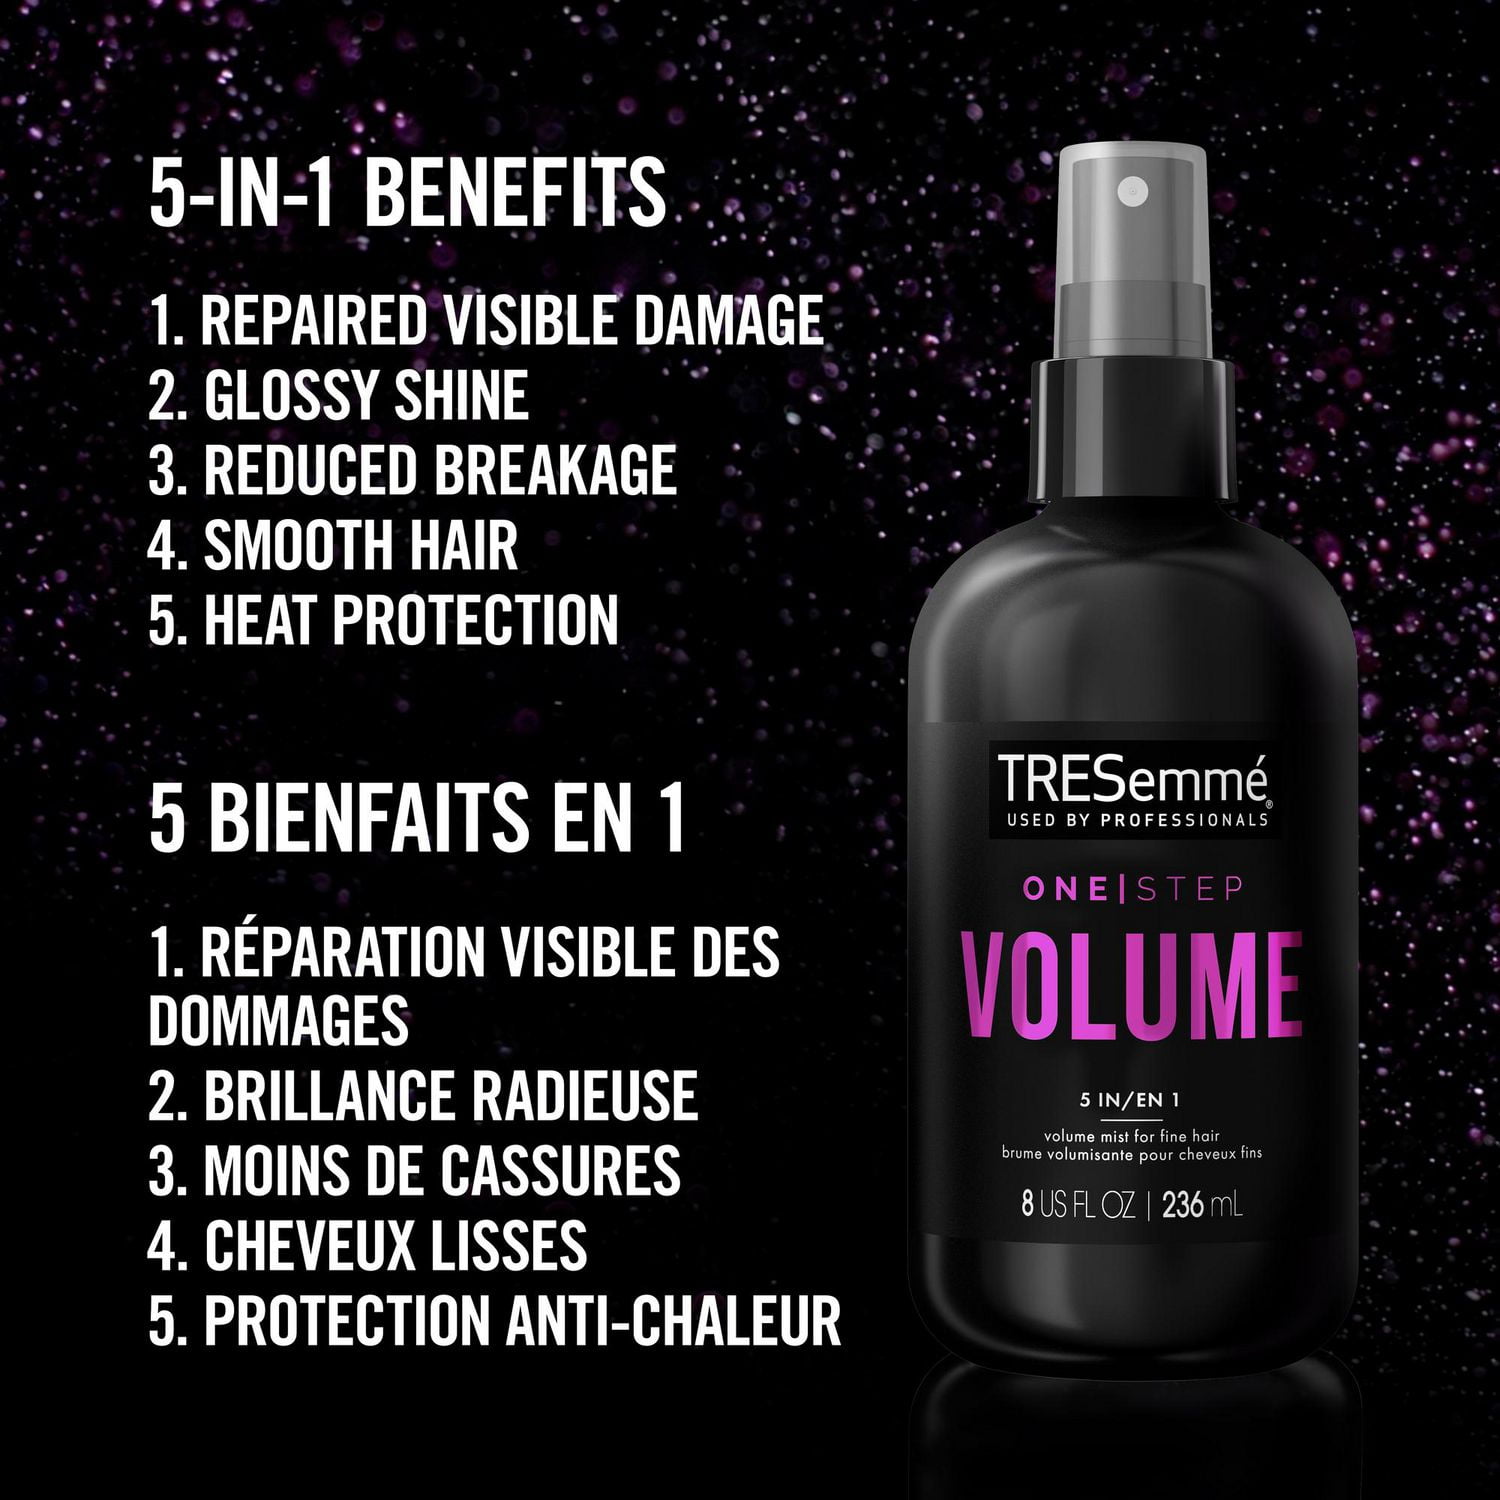 TRESemmé for 24H touchable definition Flawless Curls Hair Mousse